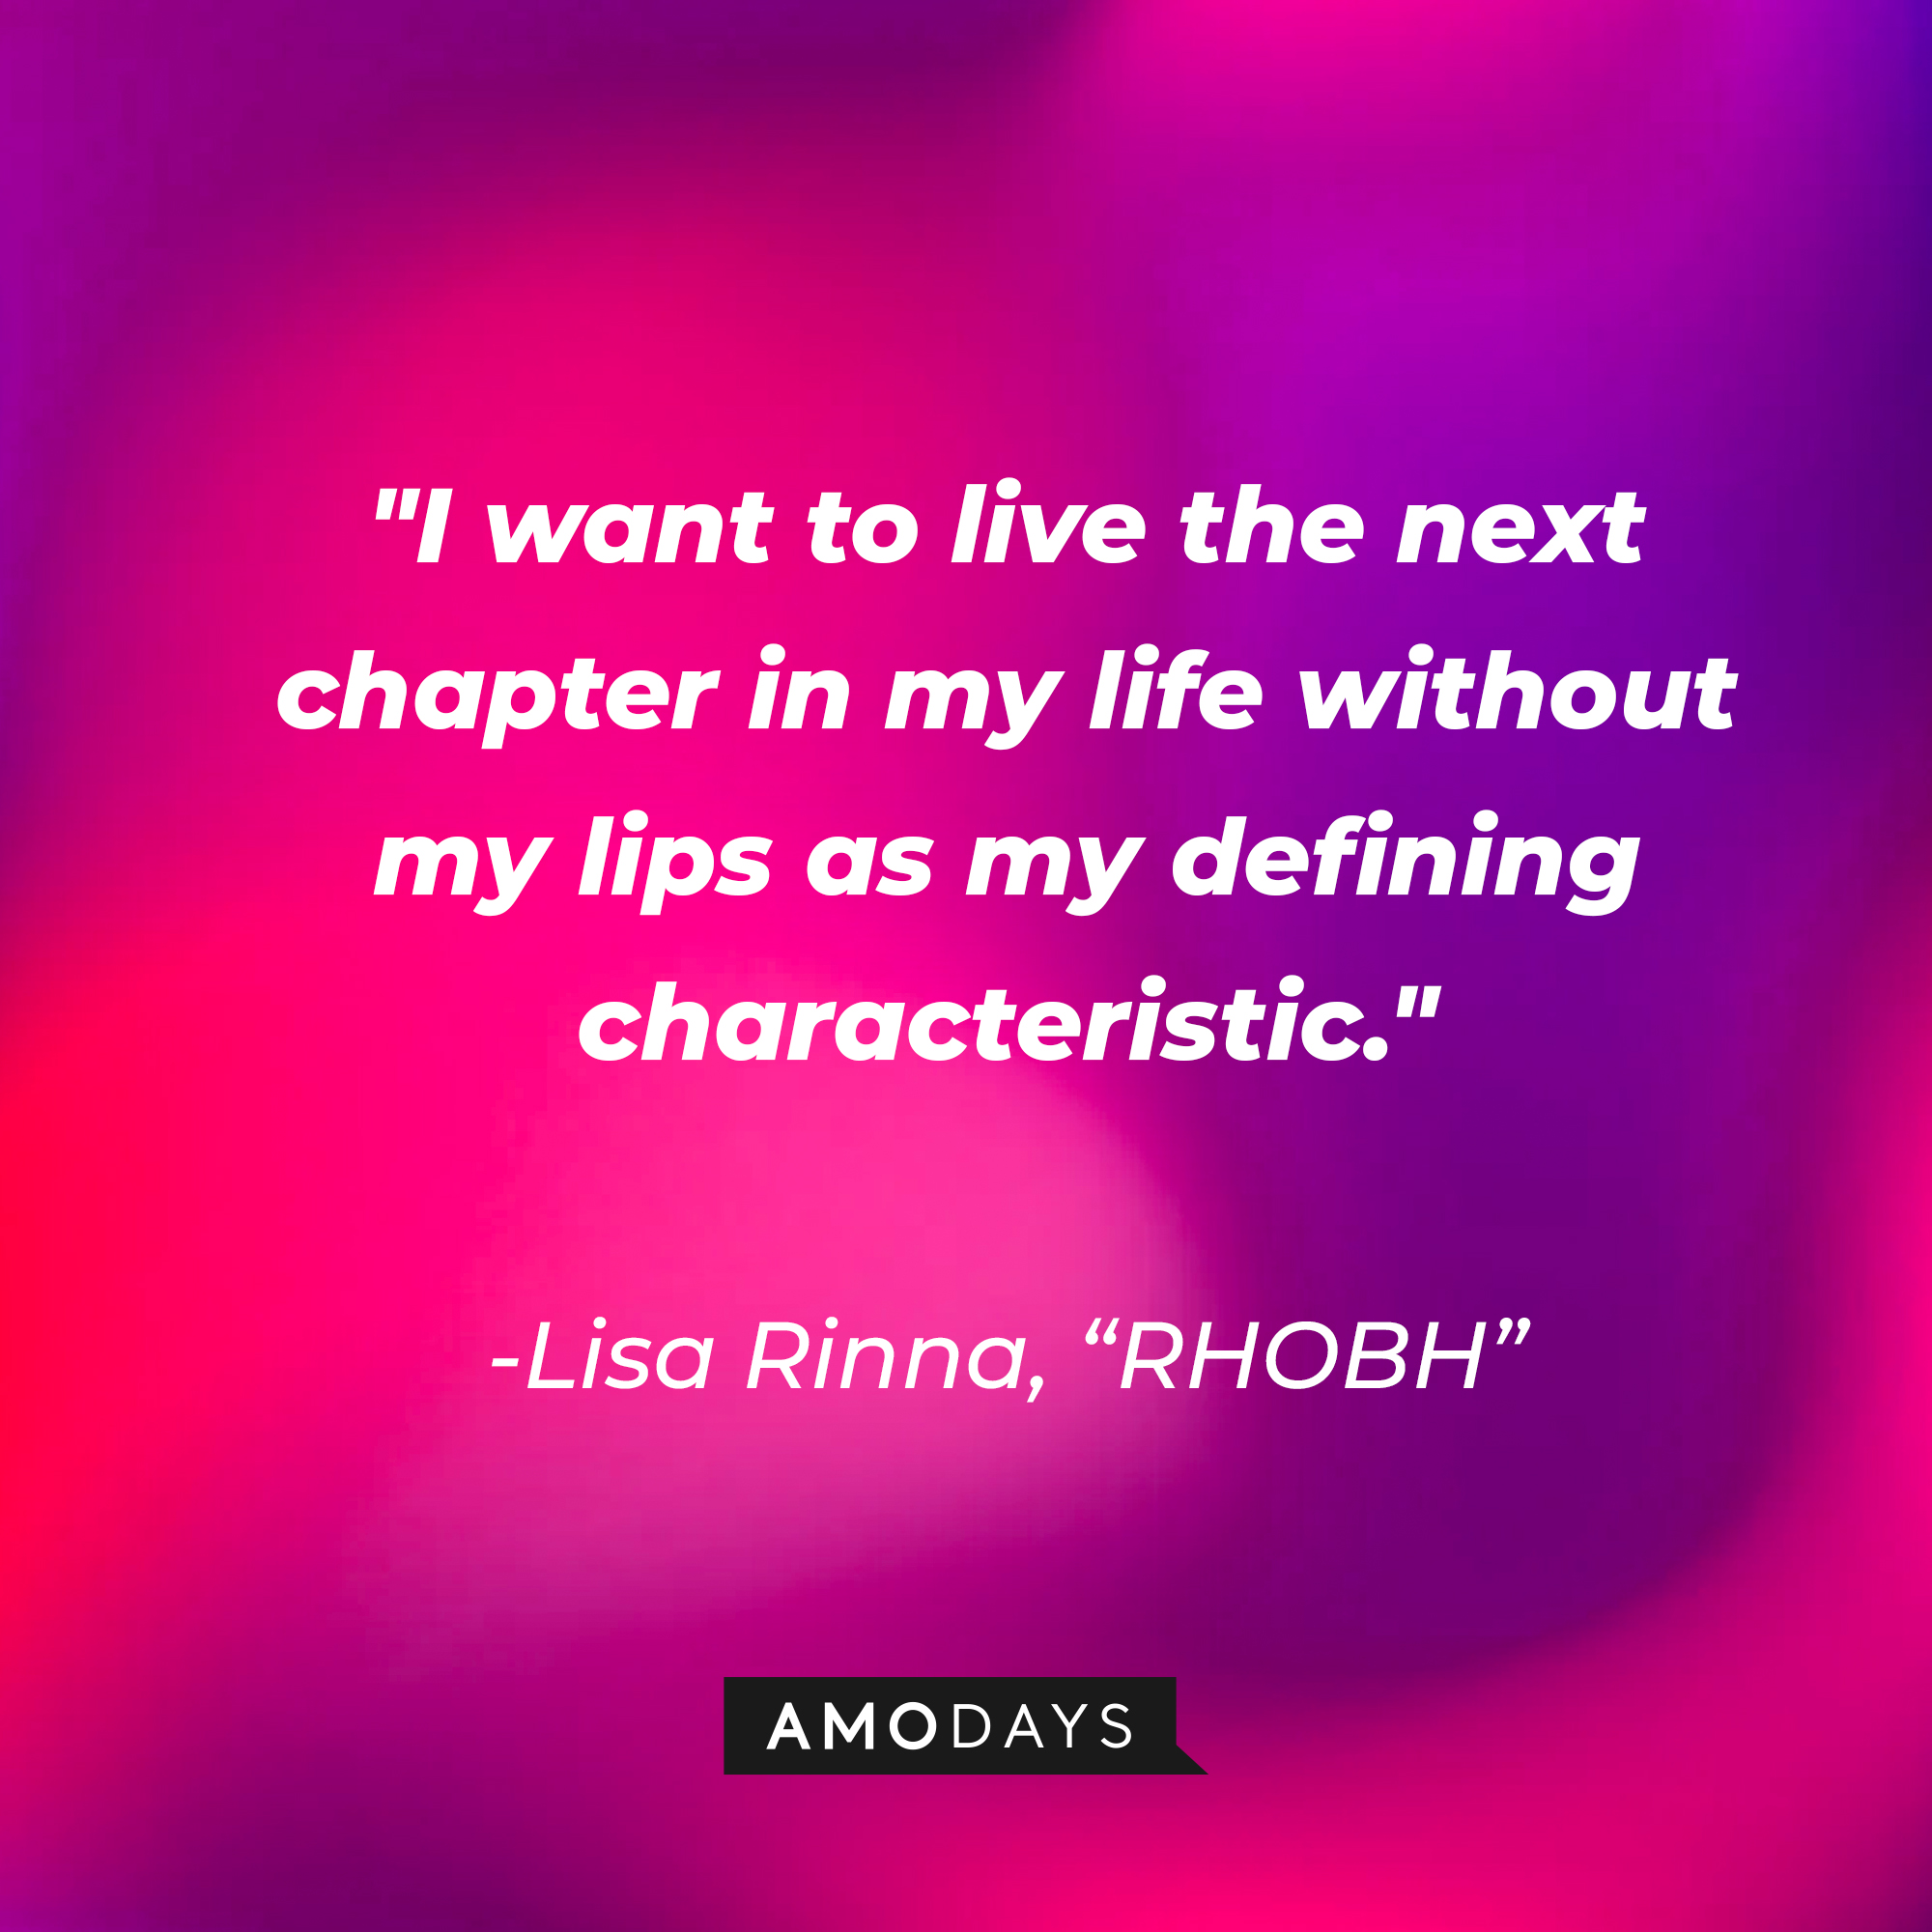 Lisa Rinna's quote from "The Real Housewives of Beverly Hills:" "I want to live the next chapter in my life without my lips as my defining characteristic." | Source: AmoDays